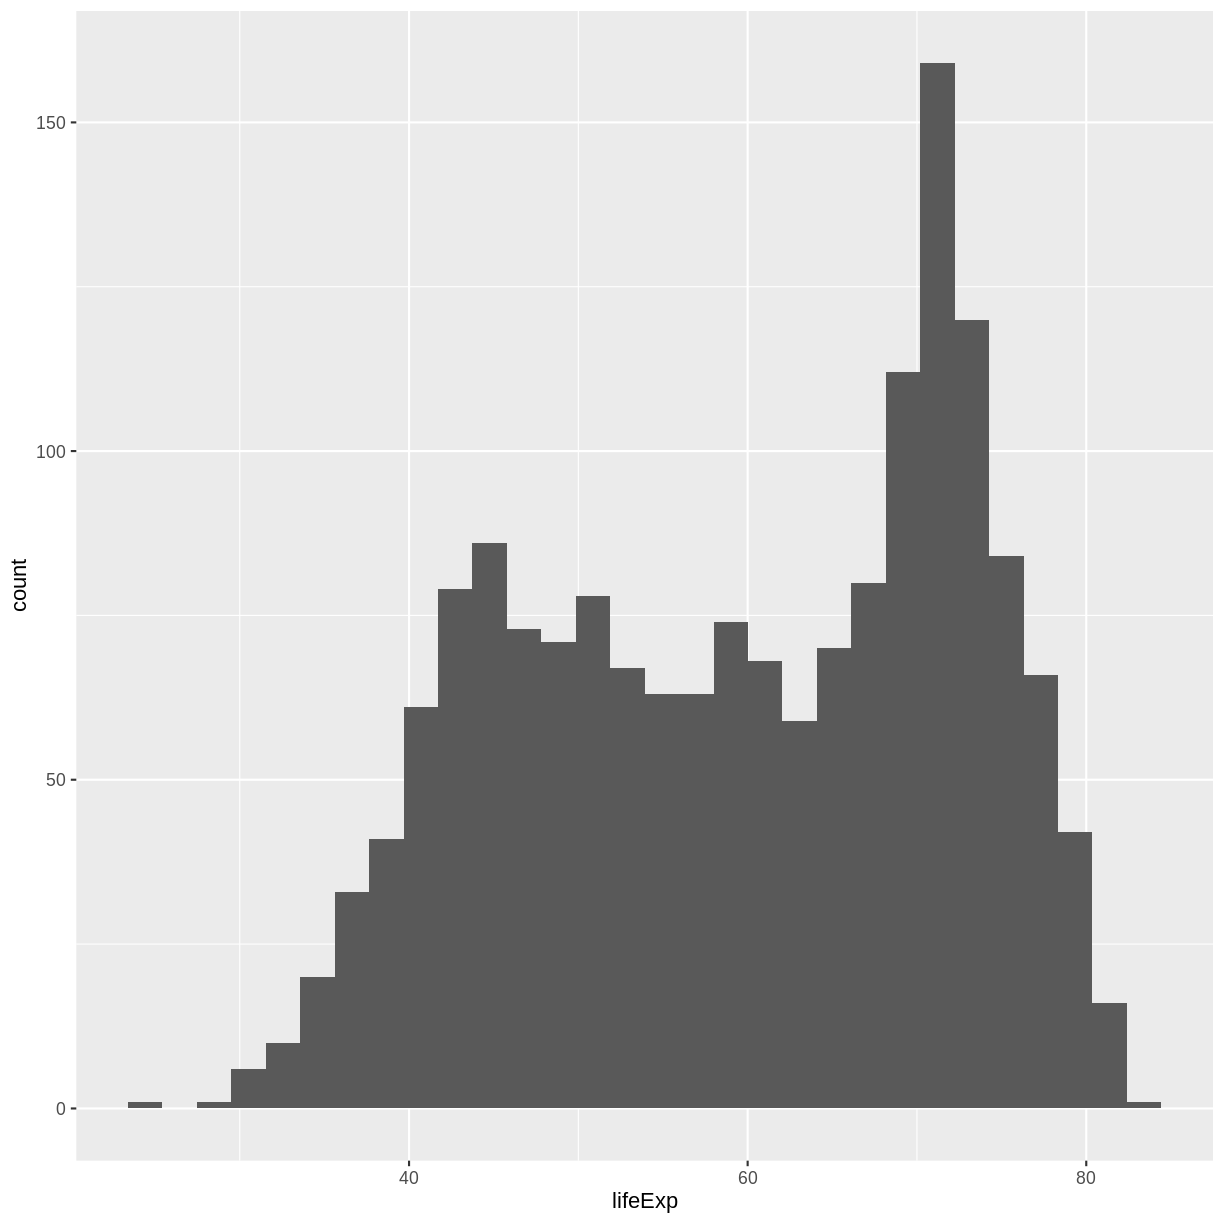 Histogram of life expectancy by country showing bimodal distribution with modes at 45 and 75